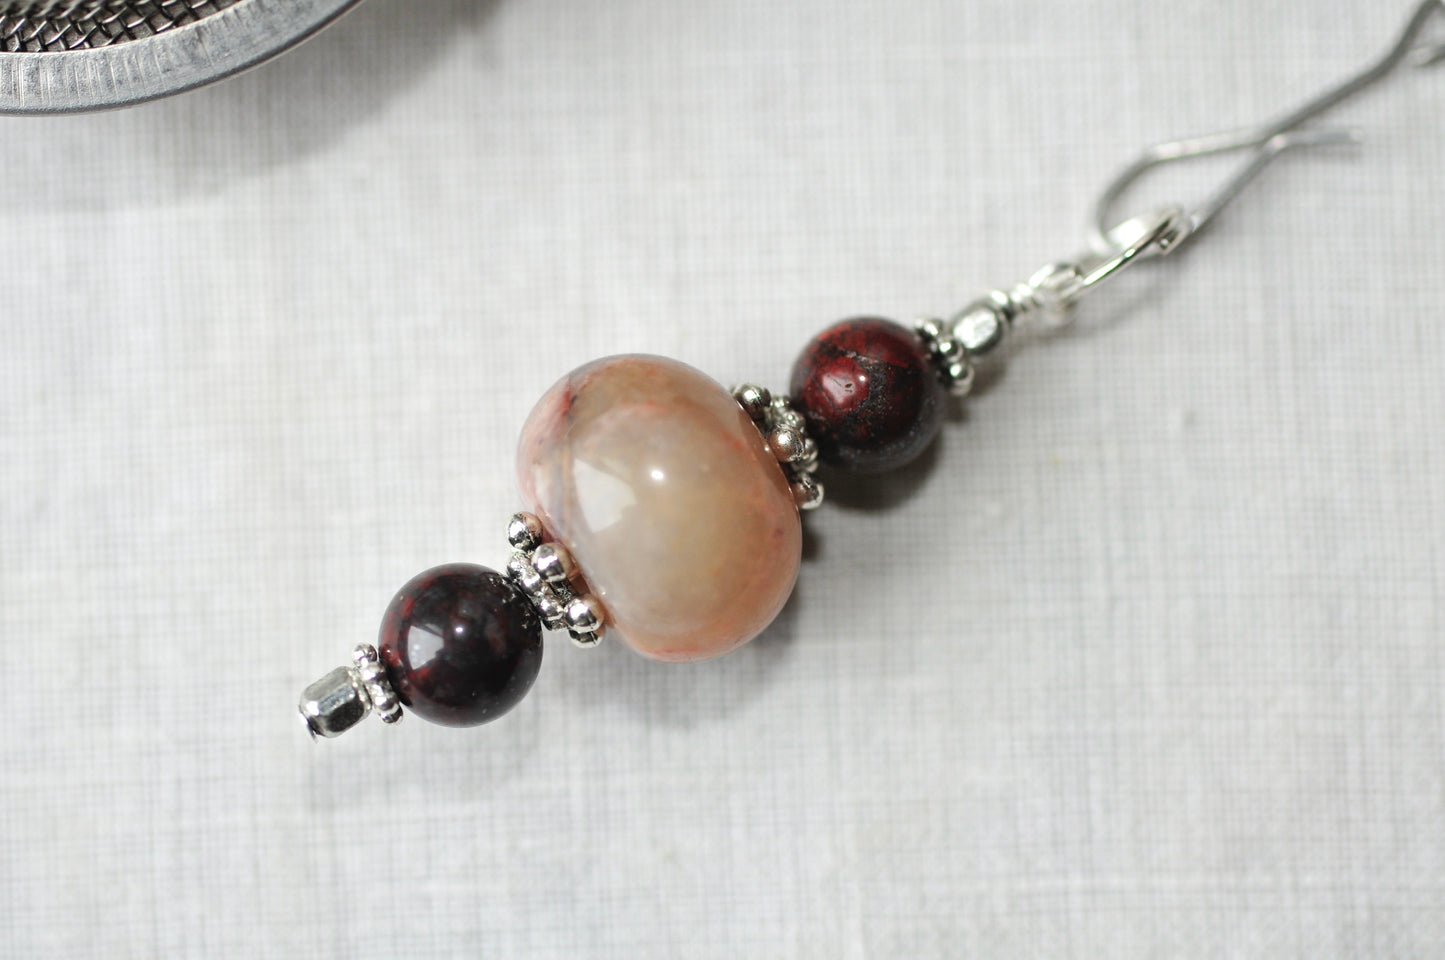 Gemstone Charm with Tea Ball | Stainless Steel Tea Infuser